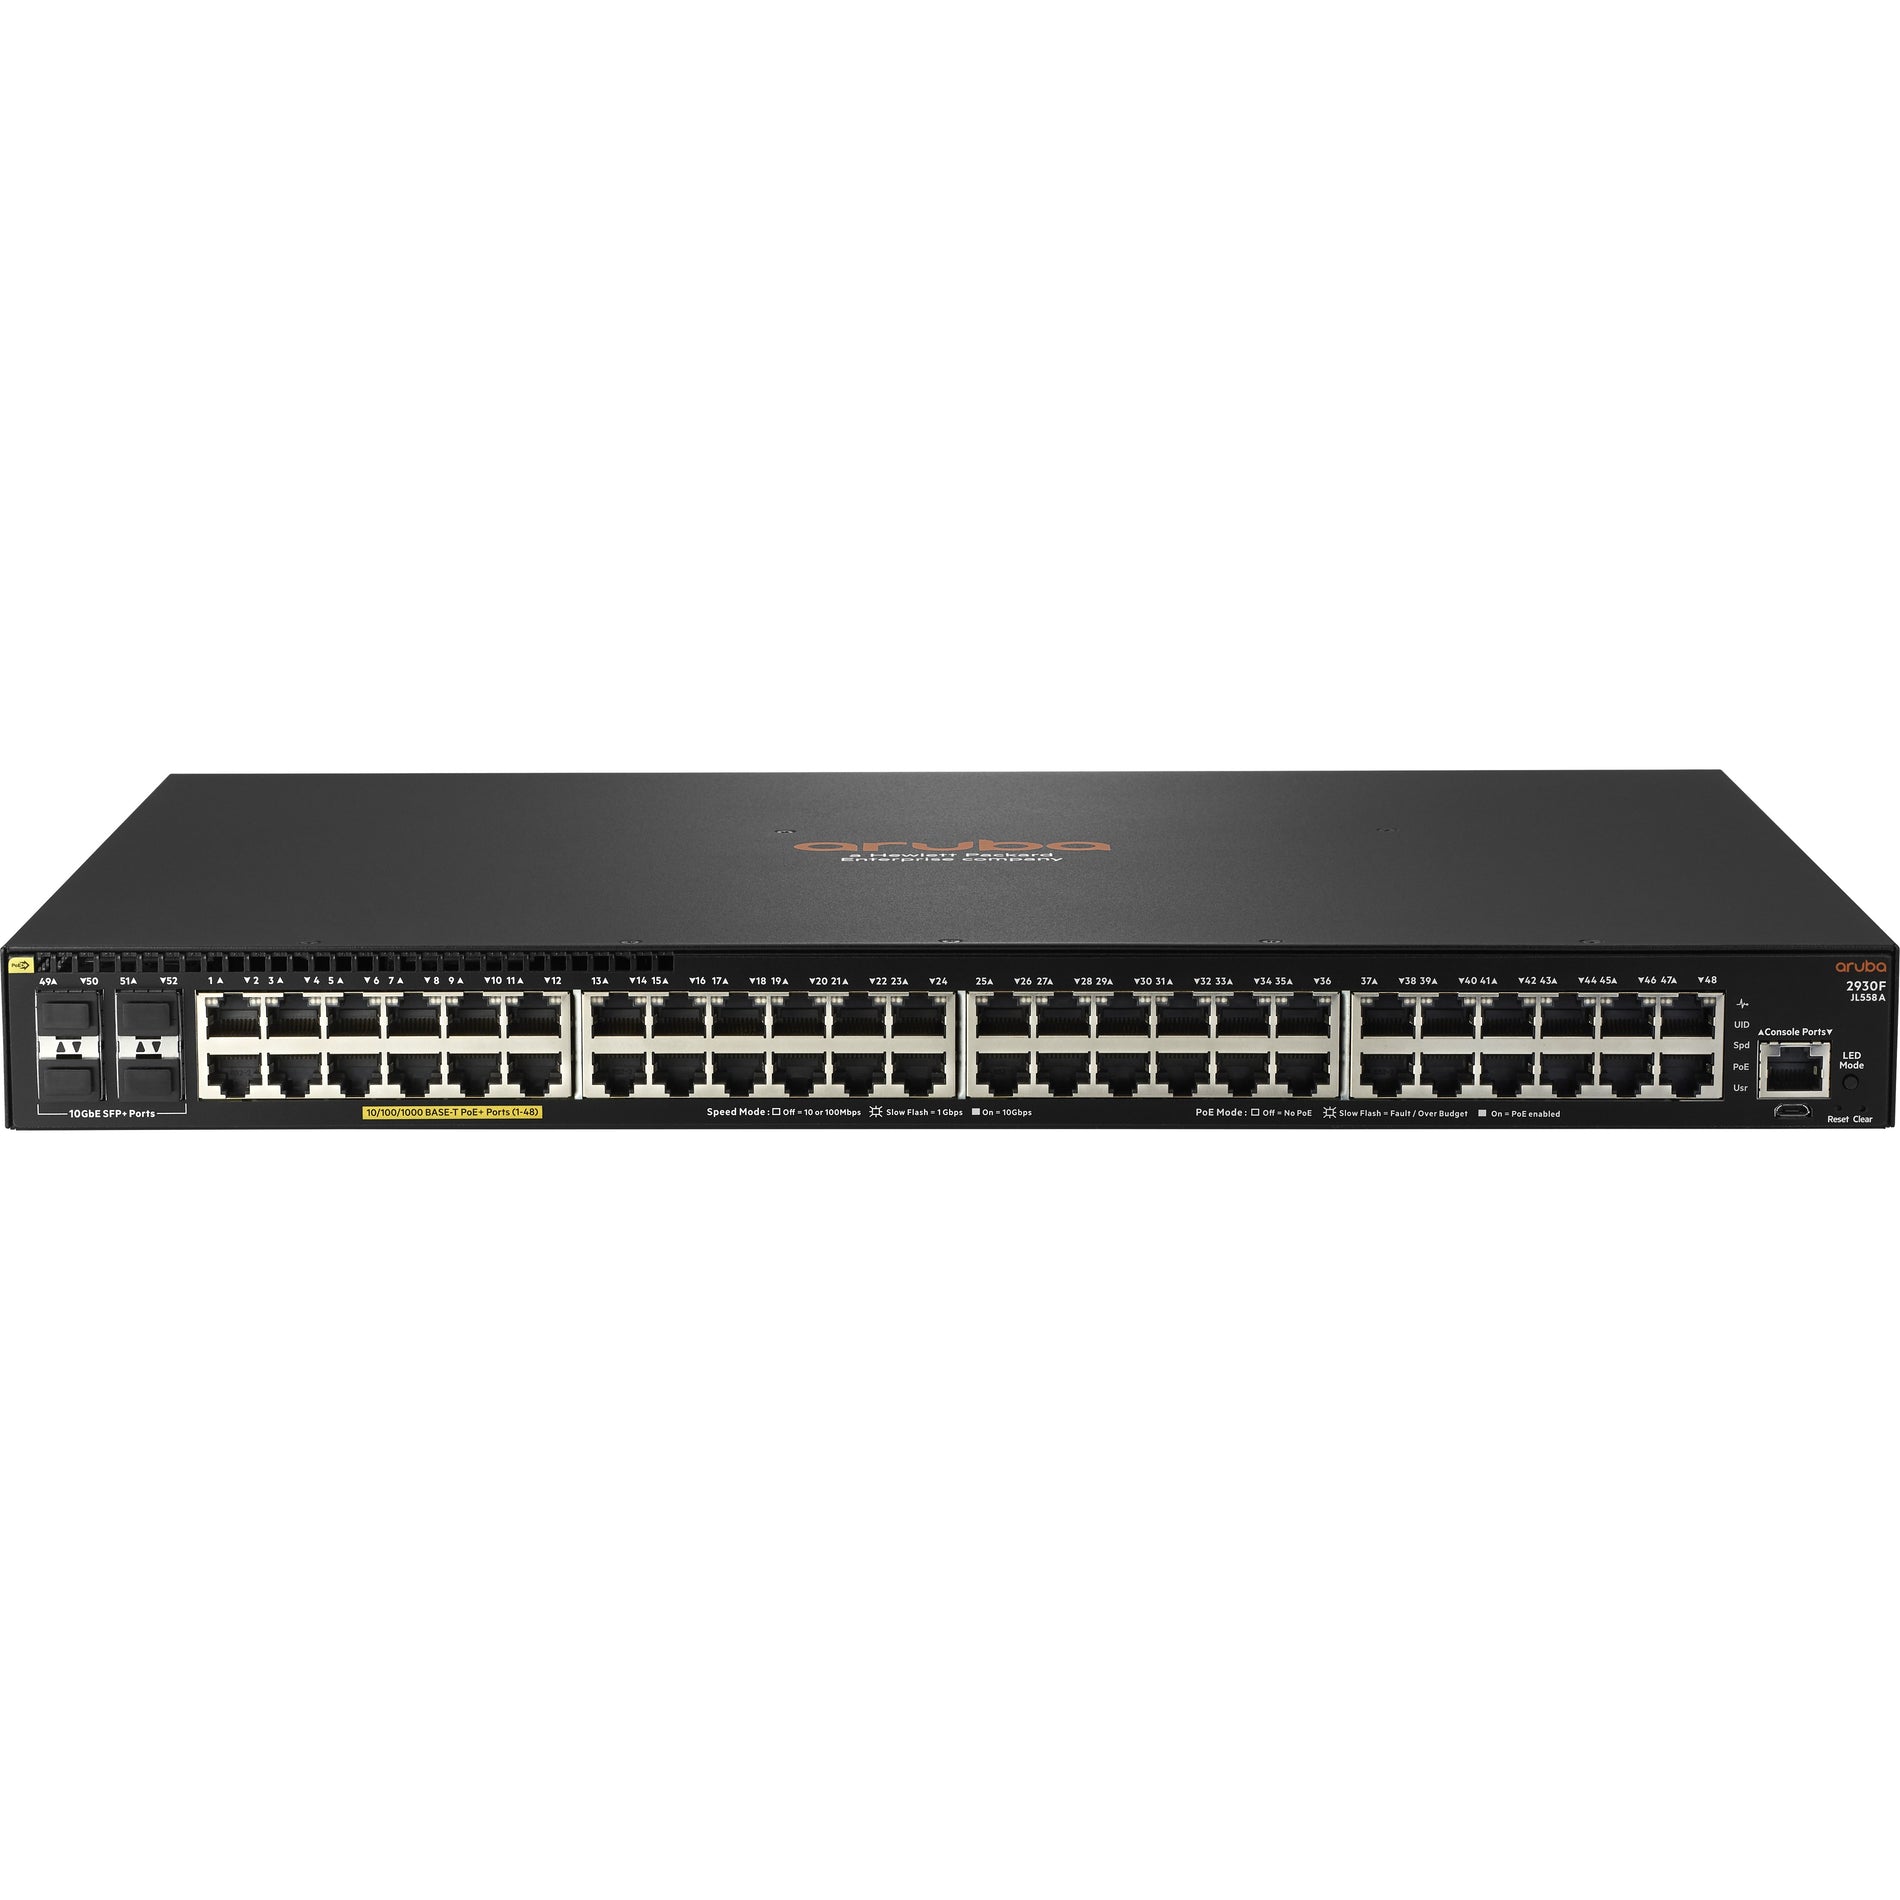 Aruba JL558A 2930F 48G PoE+ 4SFP+ Switch, High-Performance Networking Solution